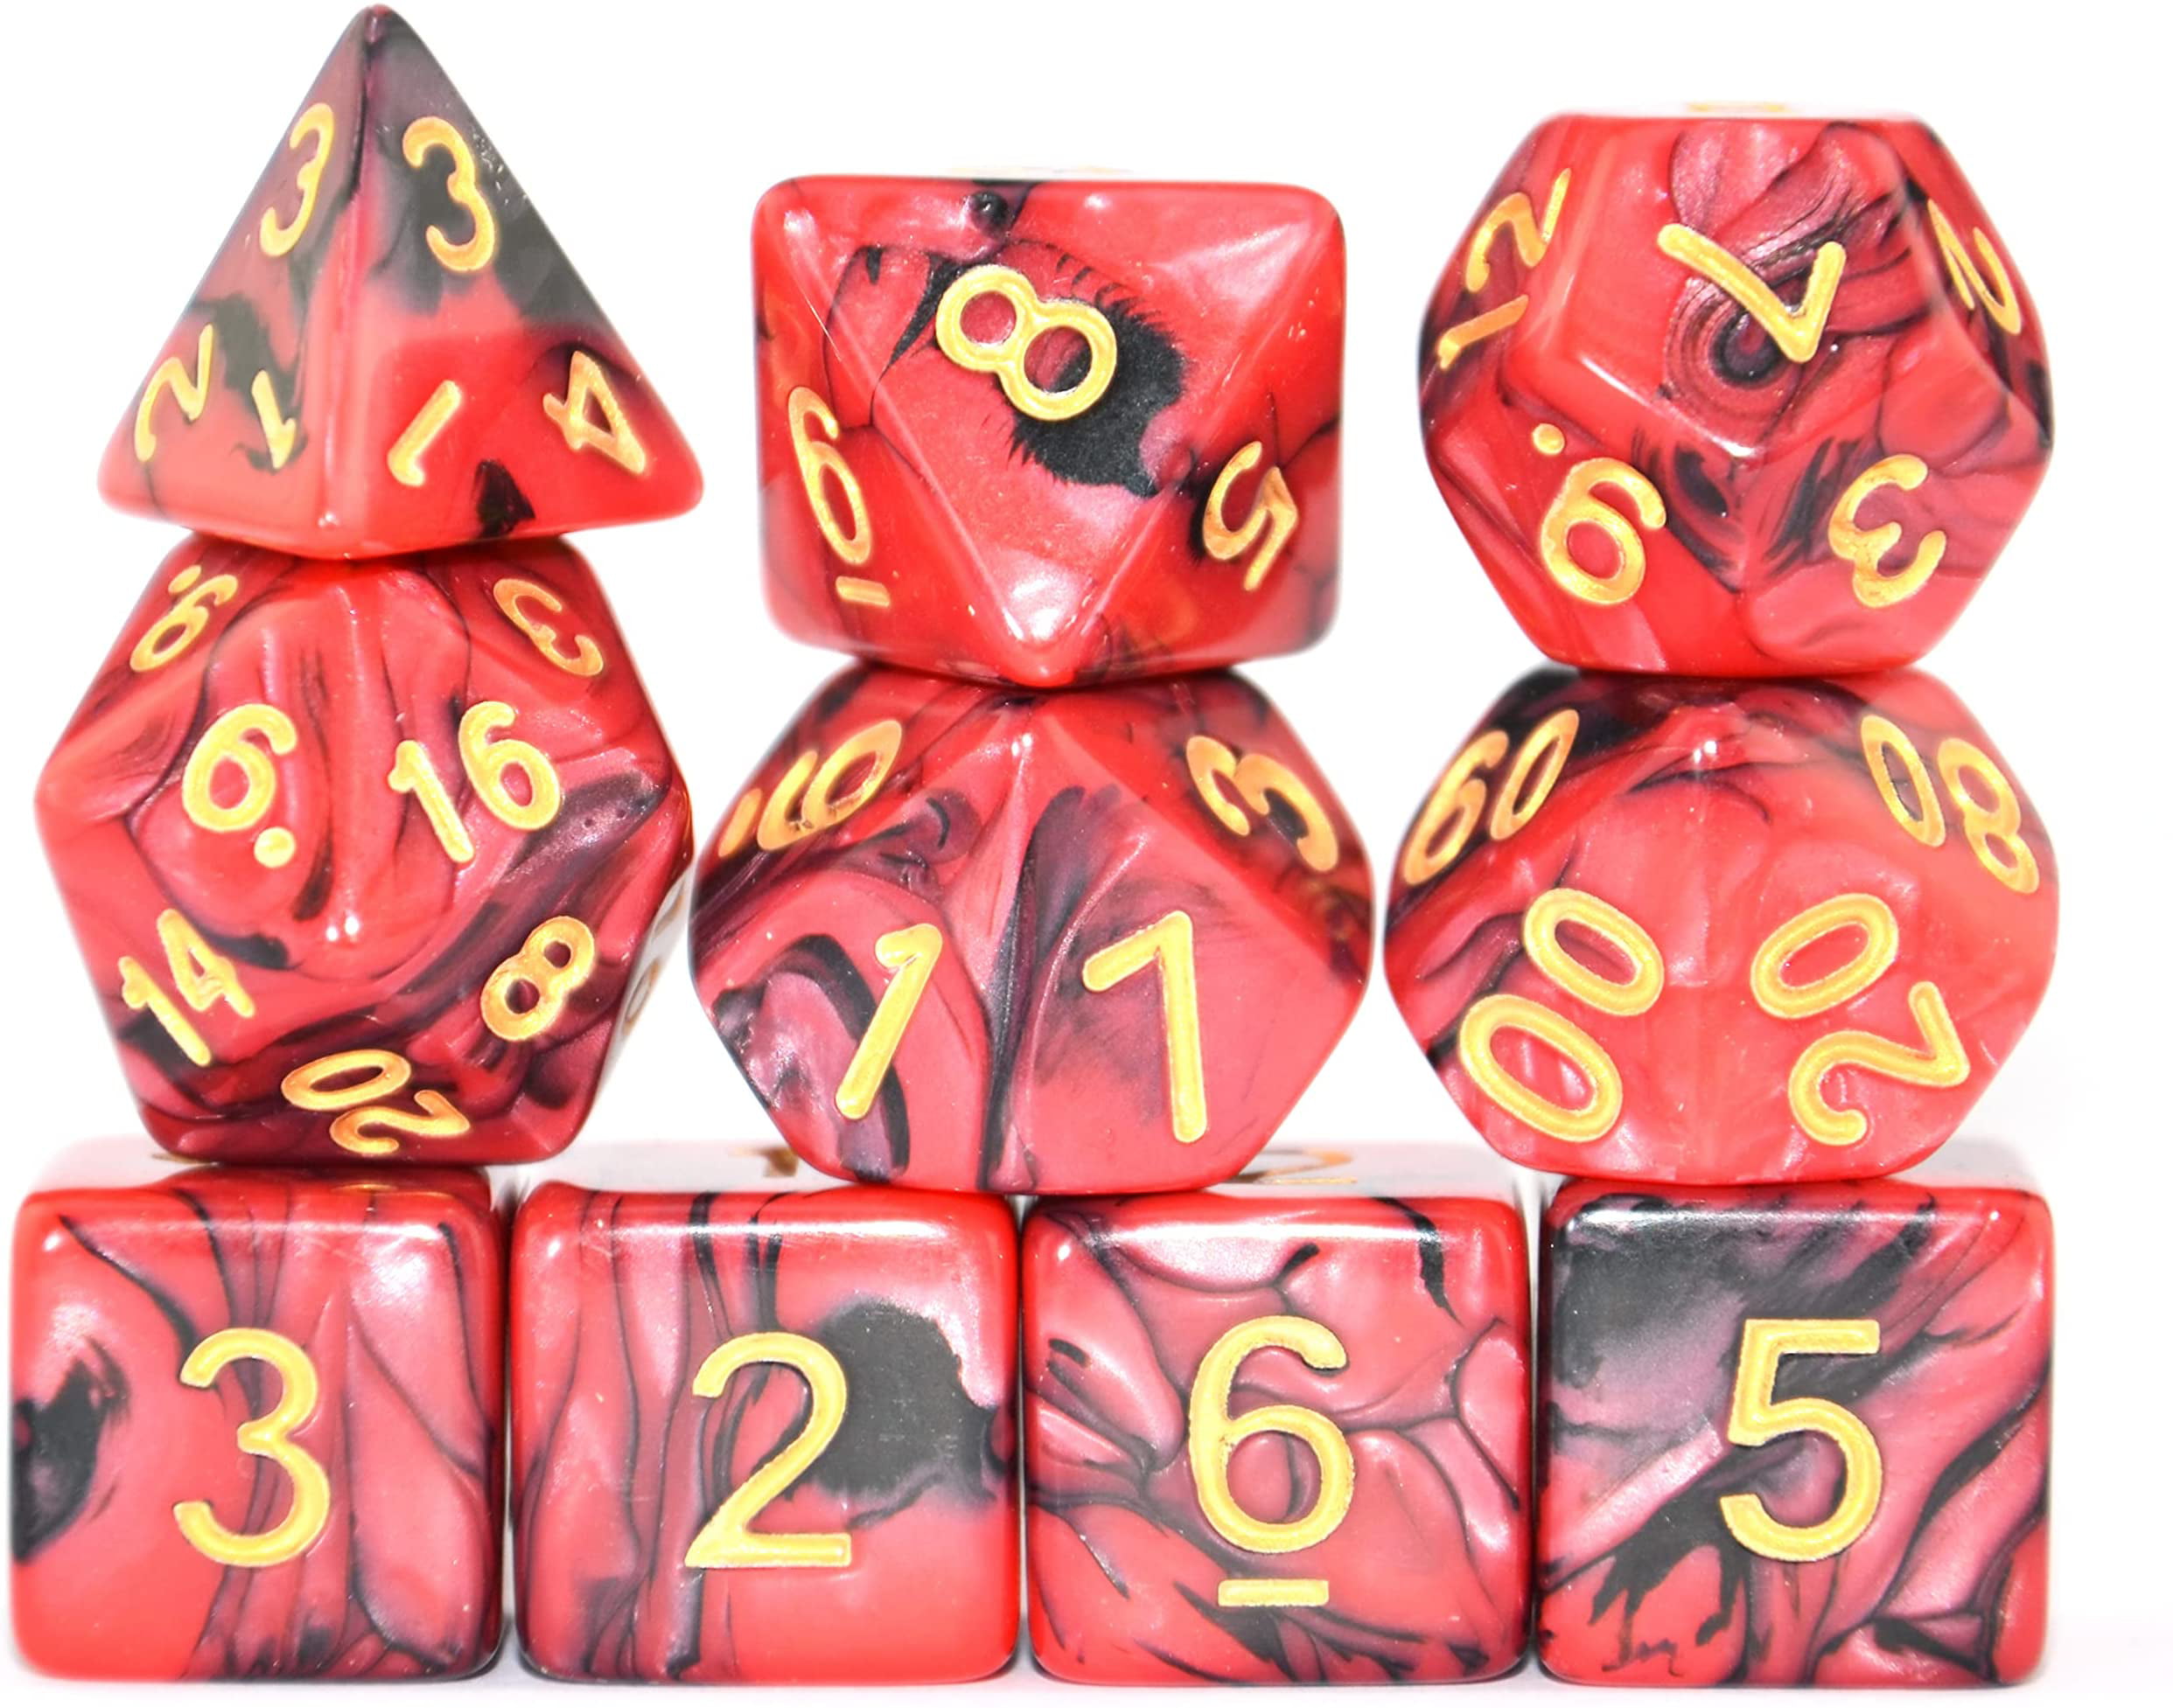 Giant D20 Dice Inflatable Extra Large Gaming DND Tabletop RPG Roleplay Red Green